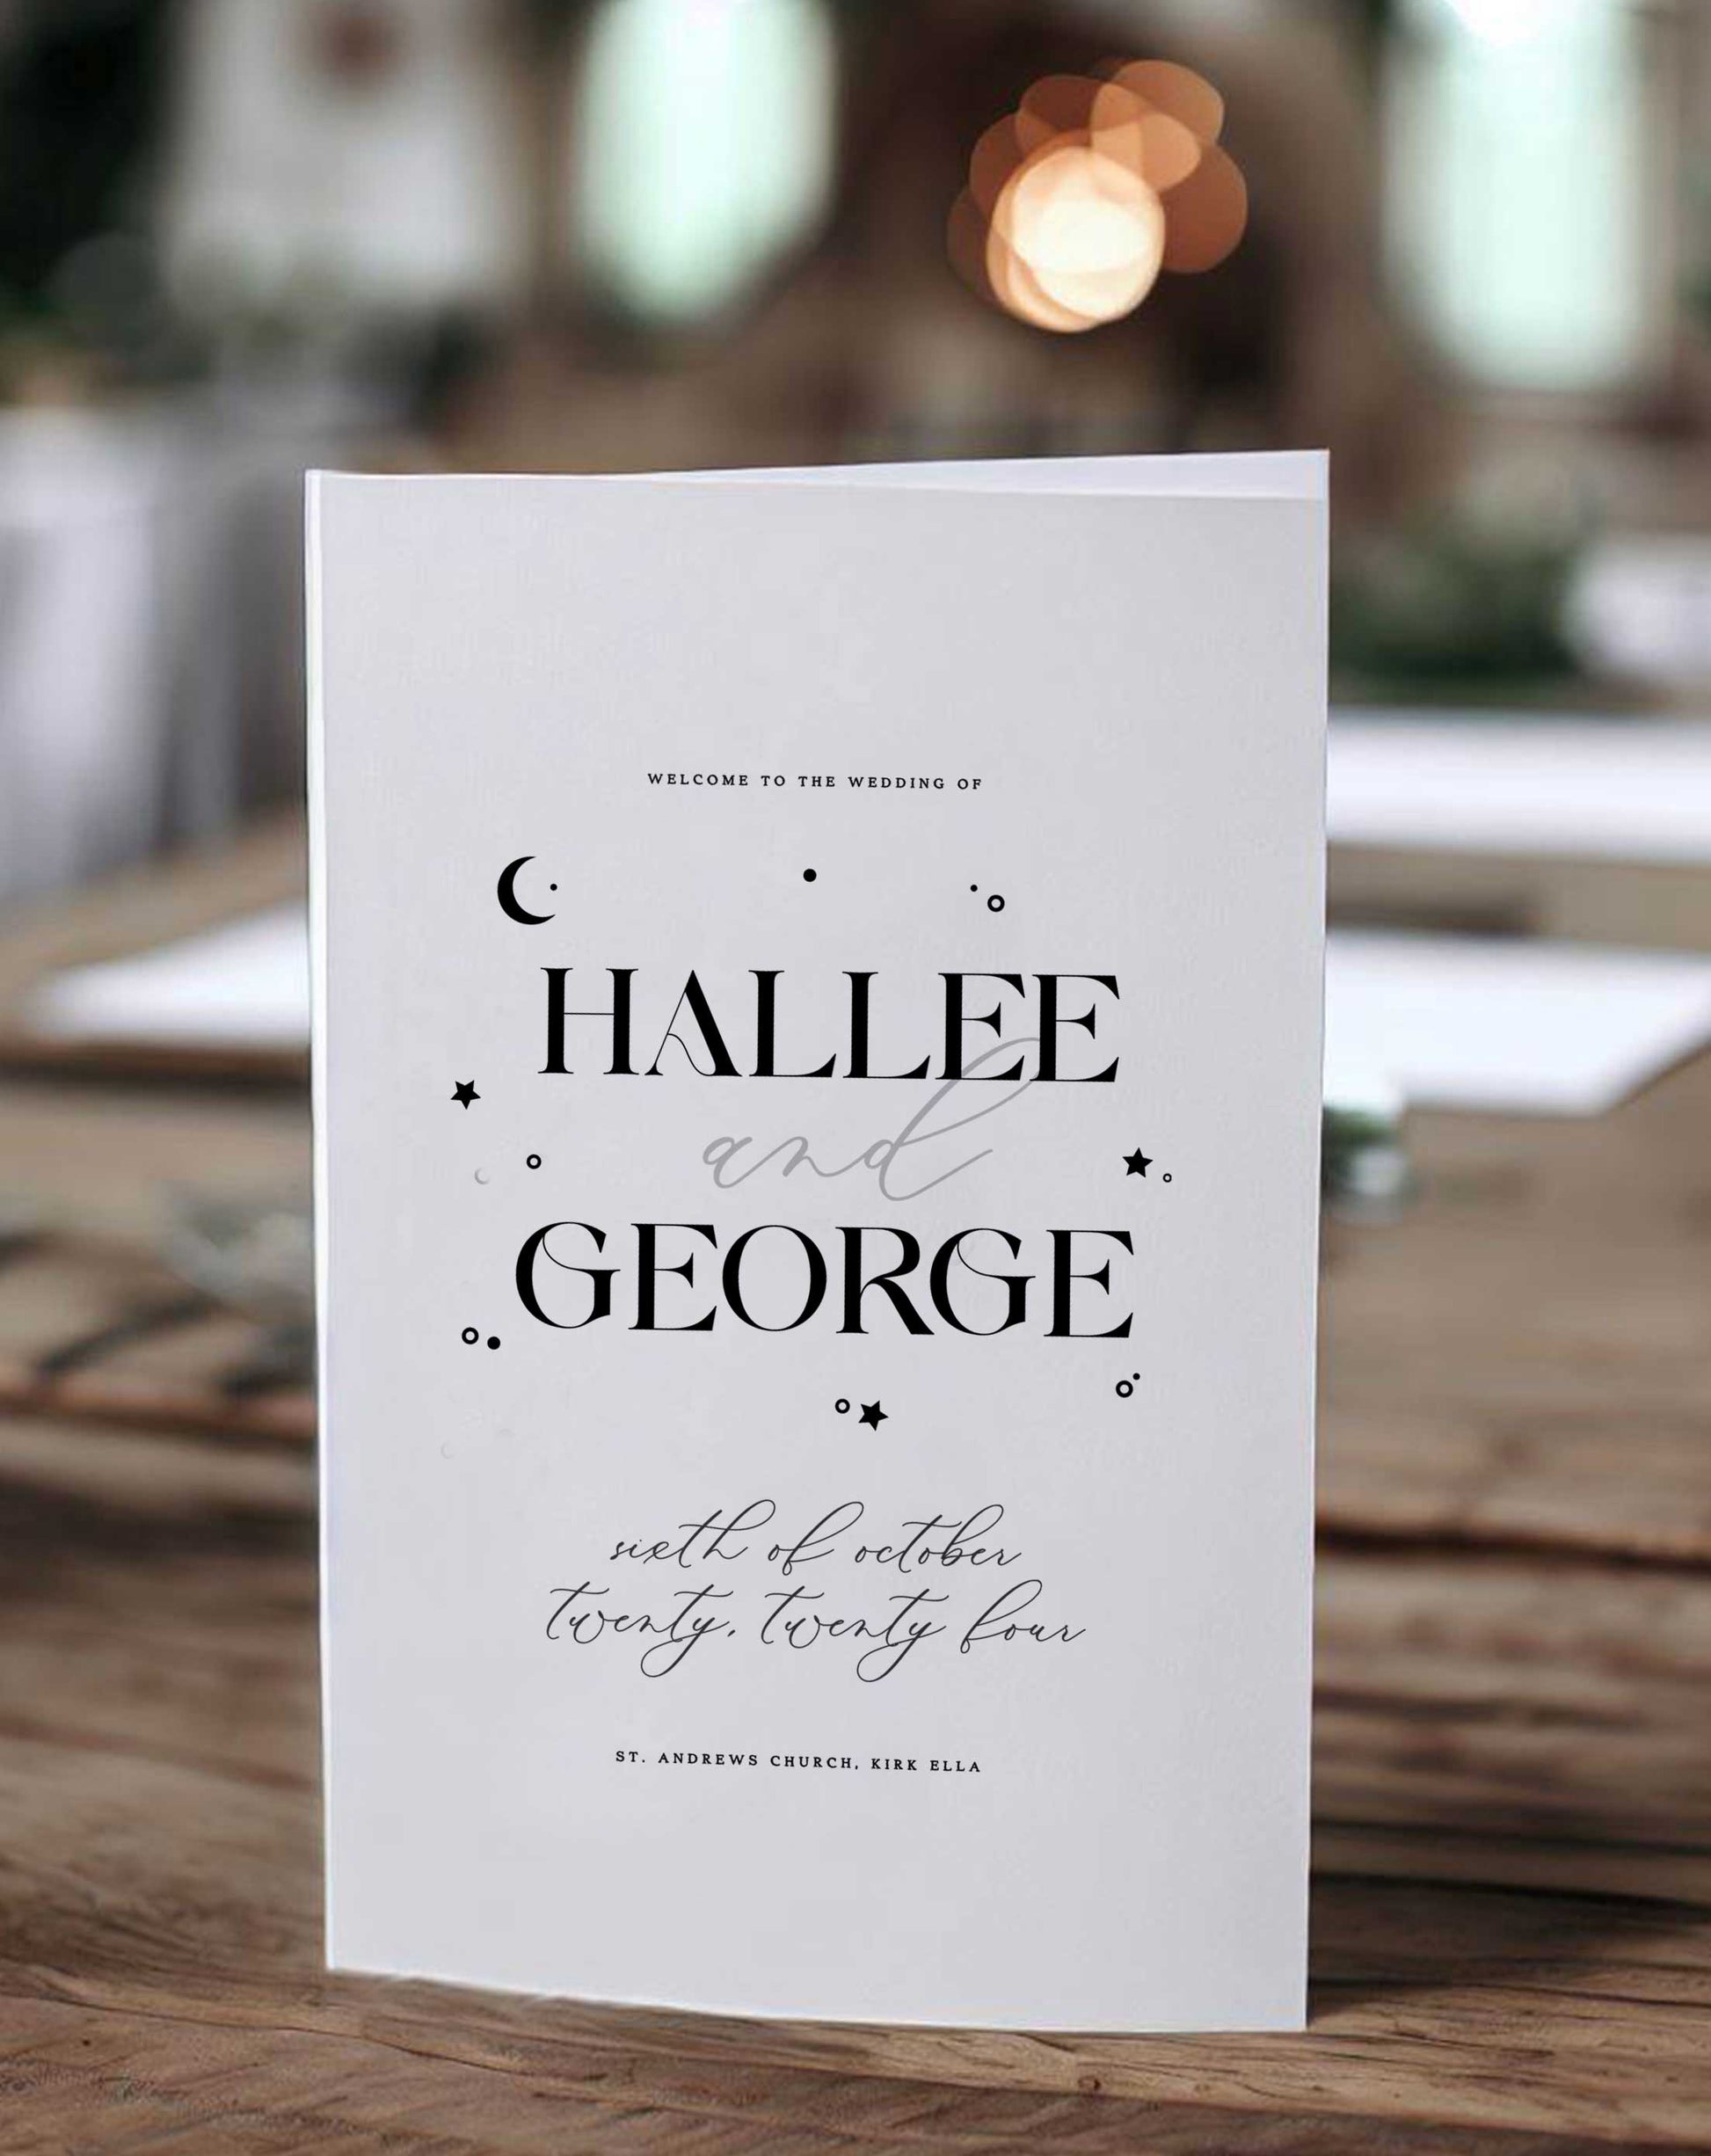 Hallee | Celestial Order Of Service - Ivy and Gold Wedding Stationery